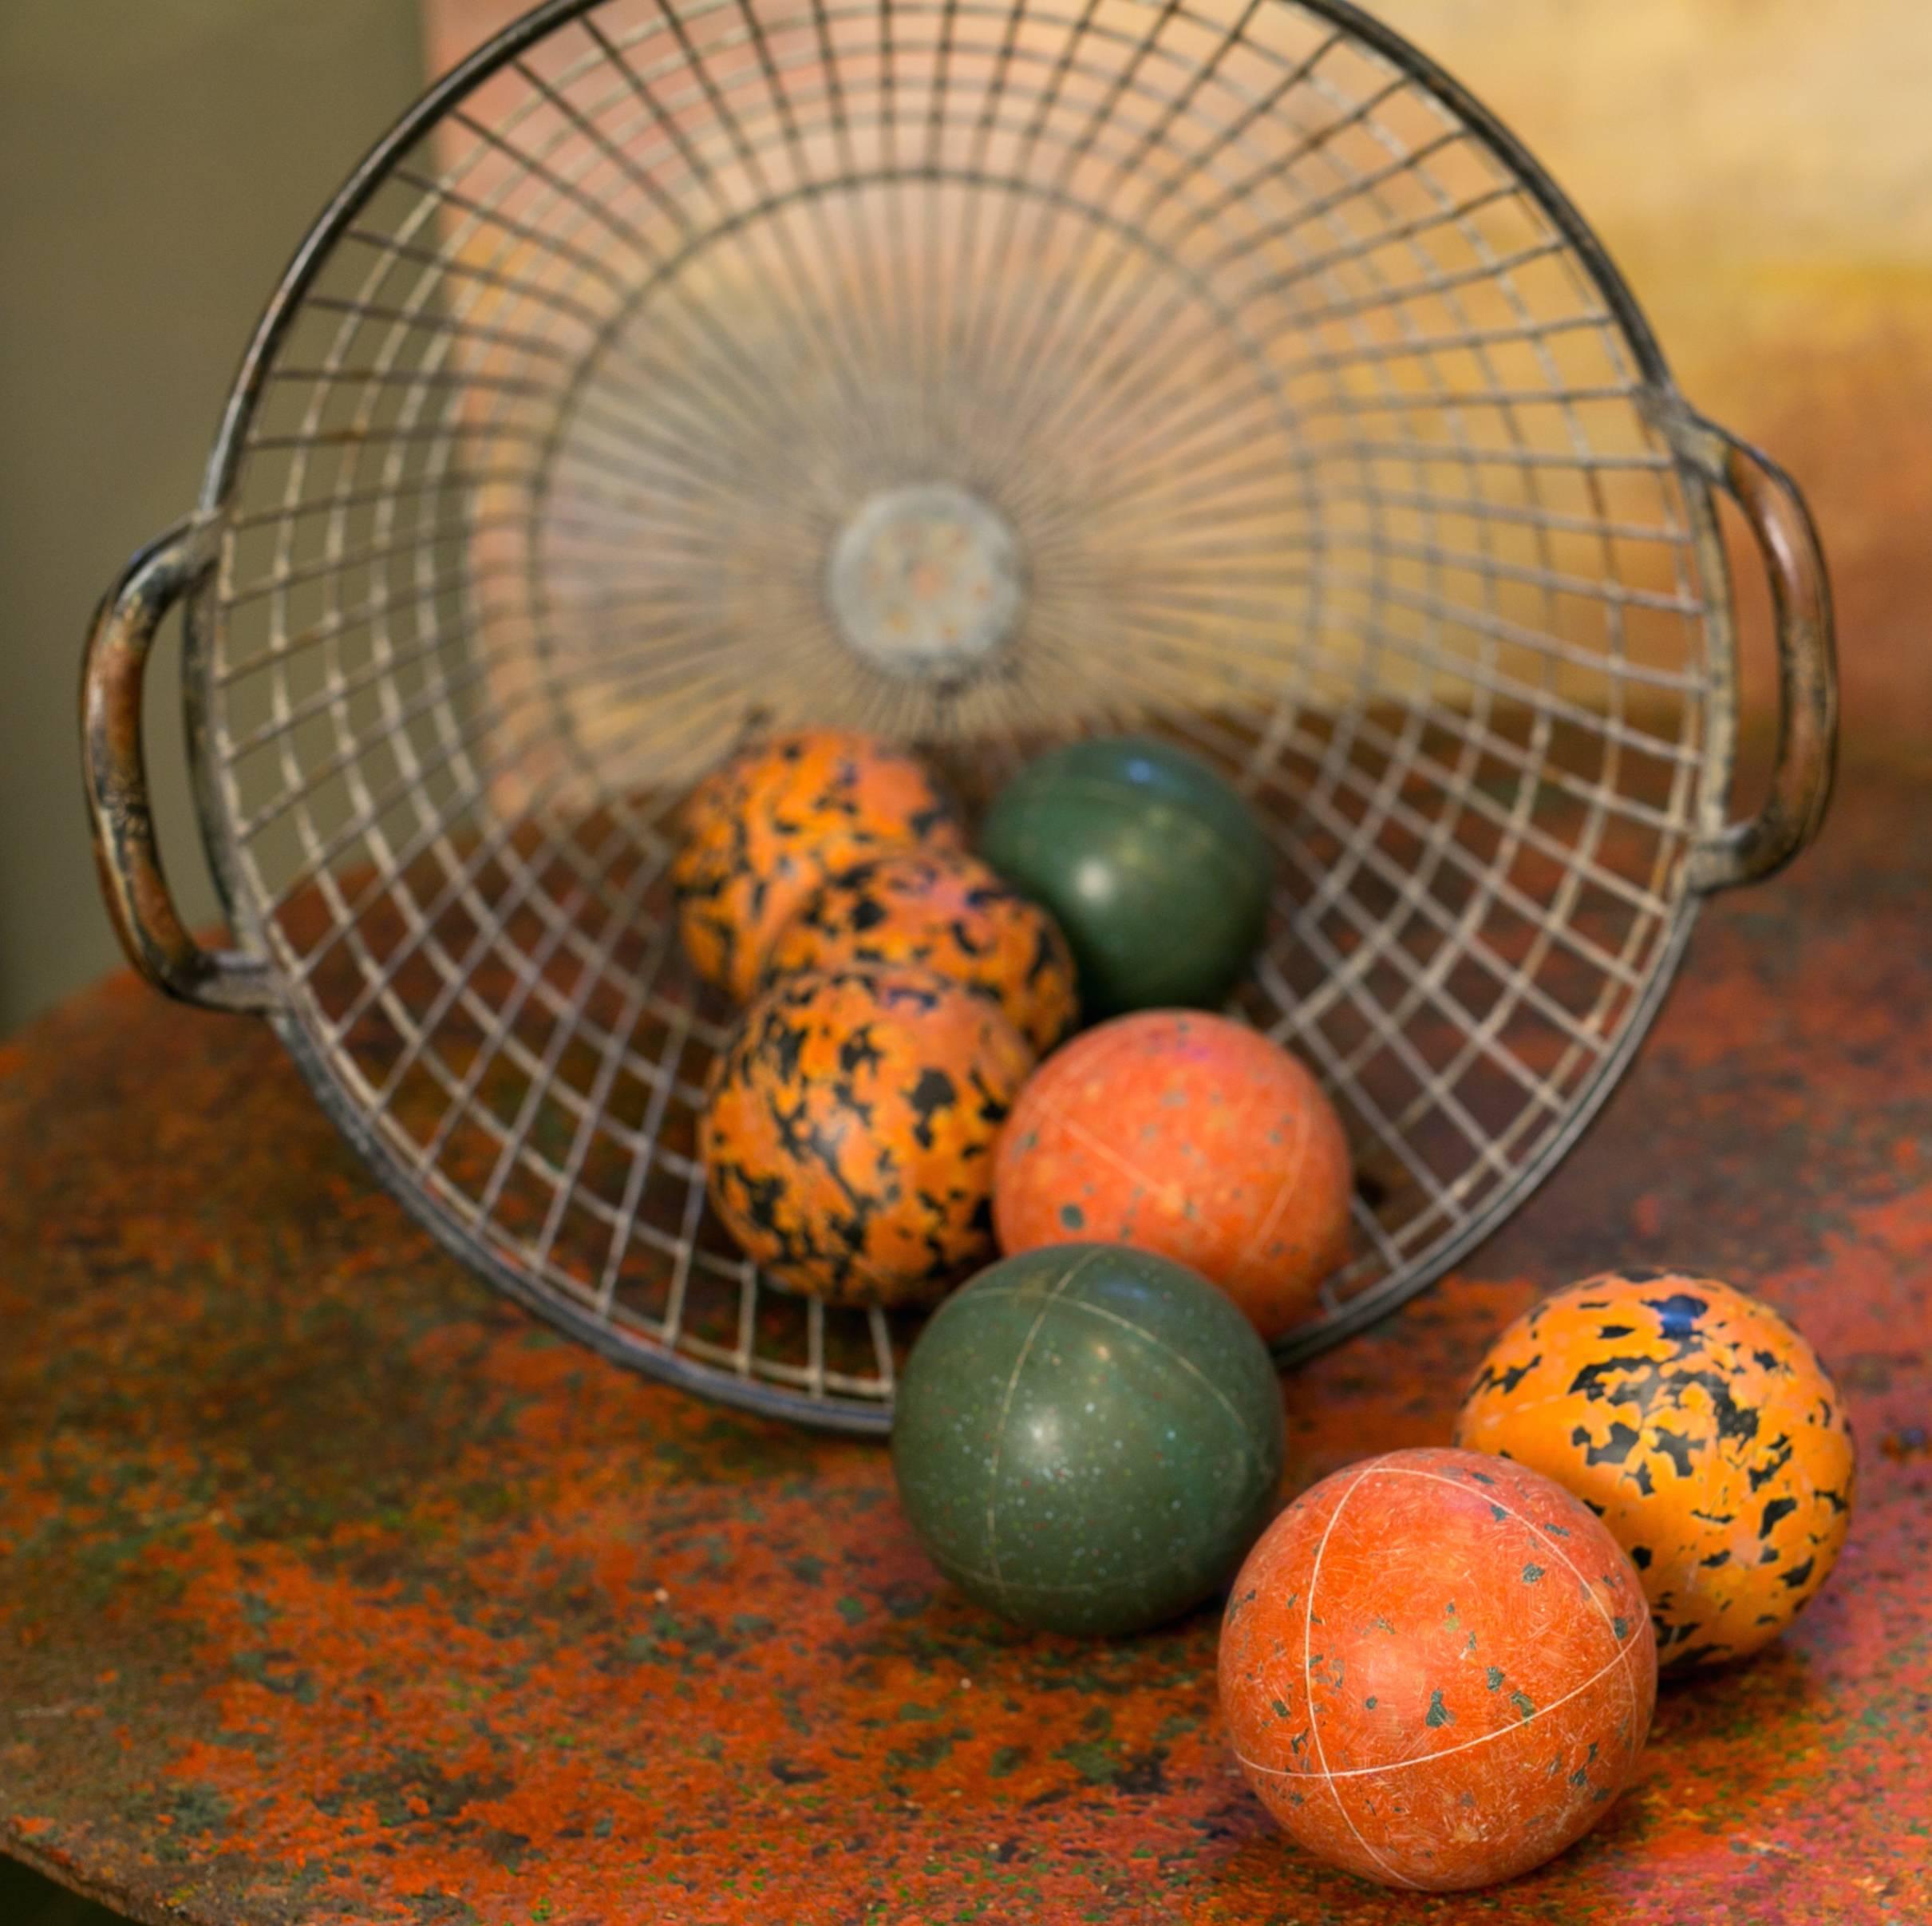 Collection of eight vintage Italian bocce balls. From Italy, circa 1950s. Beautiful colors and texture great tabletop décor. Basket sold separately.